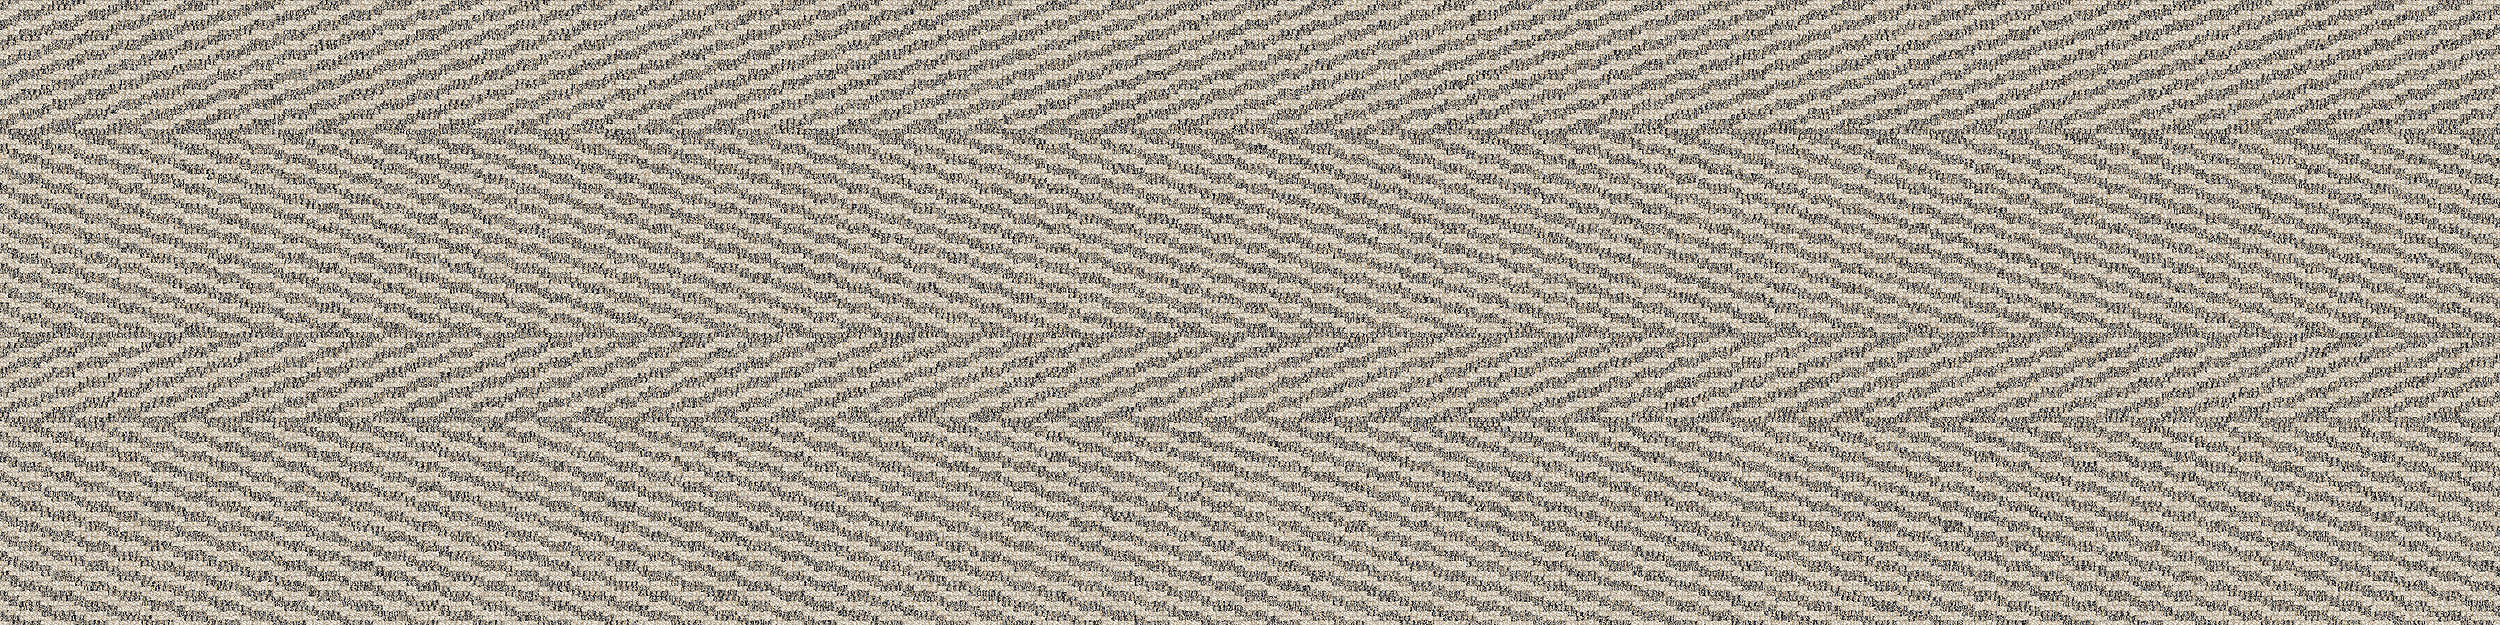 Stitch in Time Carpet Tile In Shell Stitch numéro d’image 6